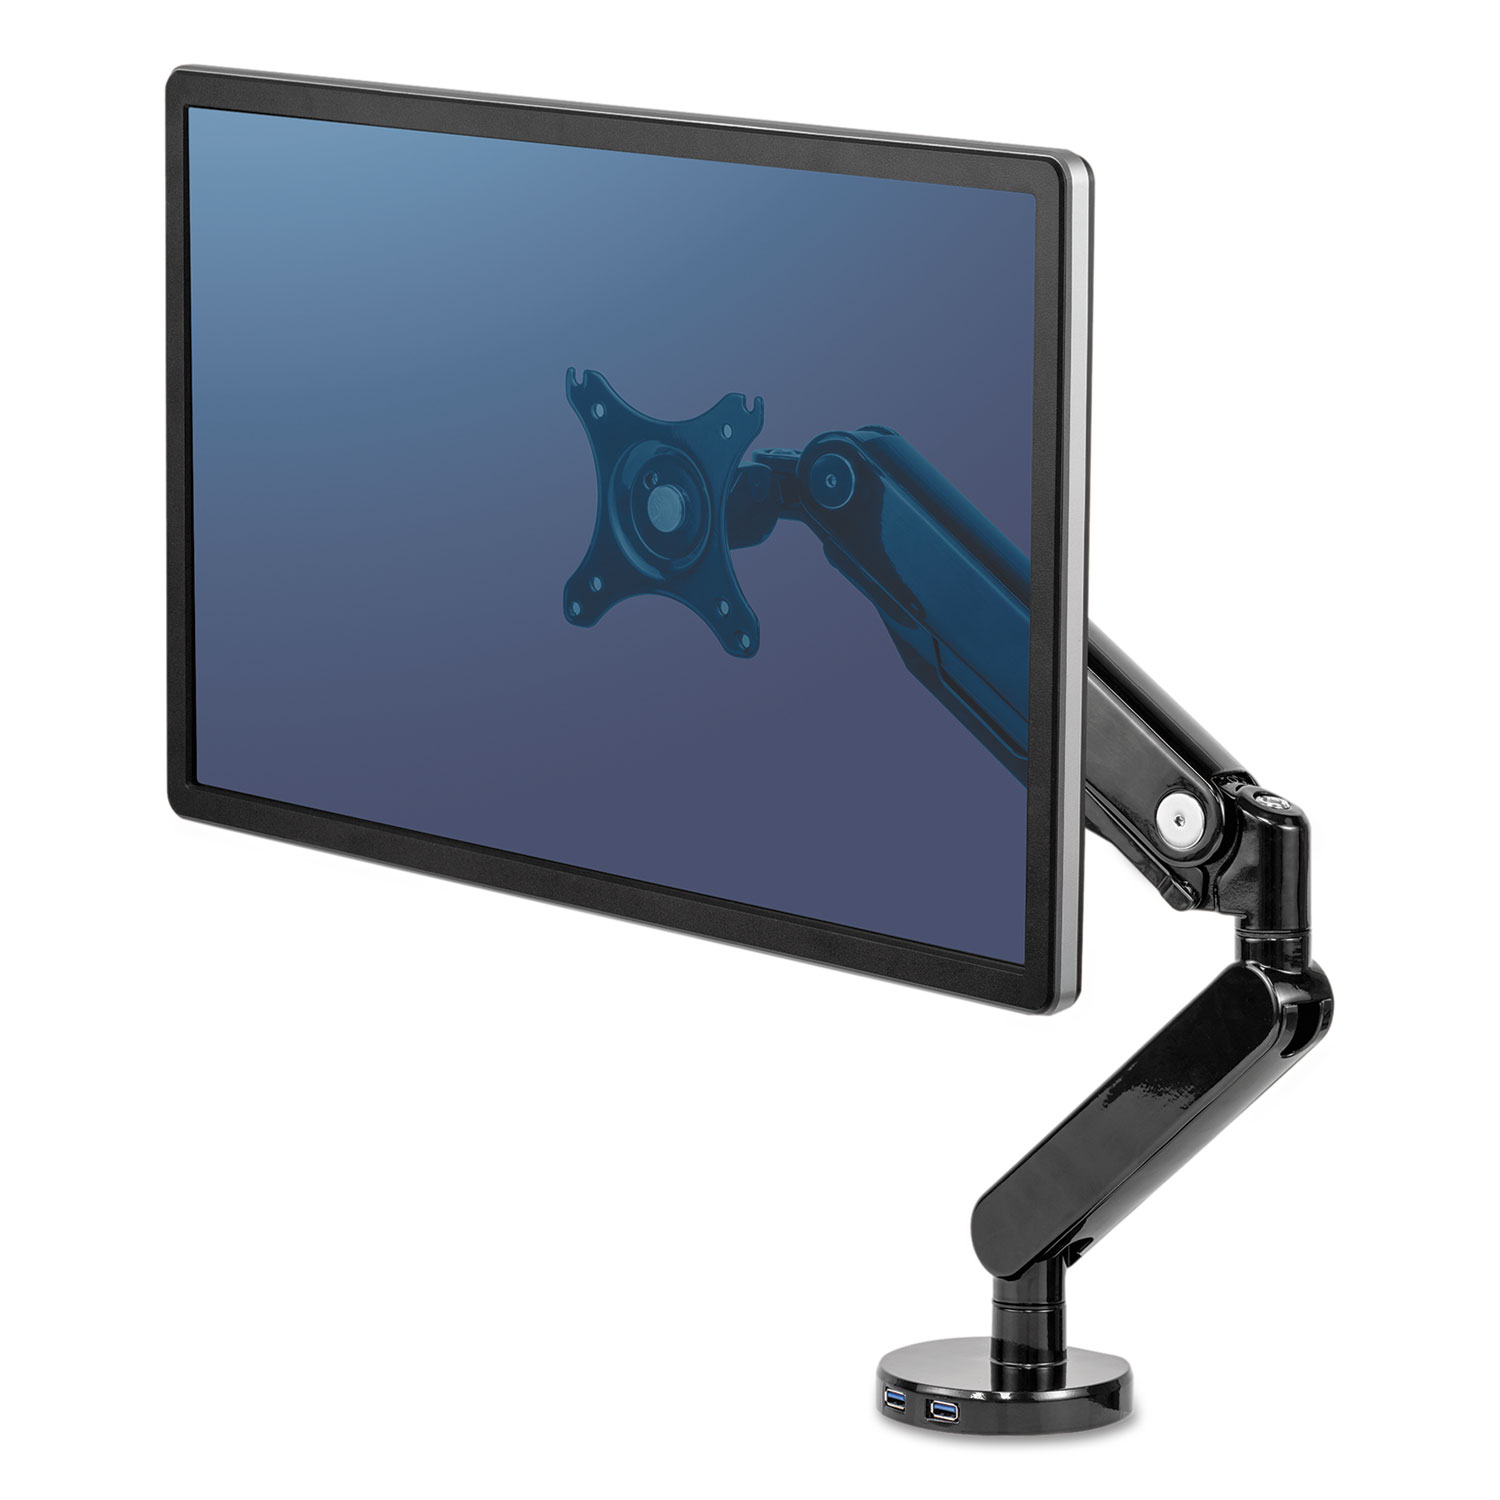 Platinum Series Single Monitor Arm, Up to 30, up to 20lbs., Clamp/Grommet,Black